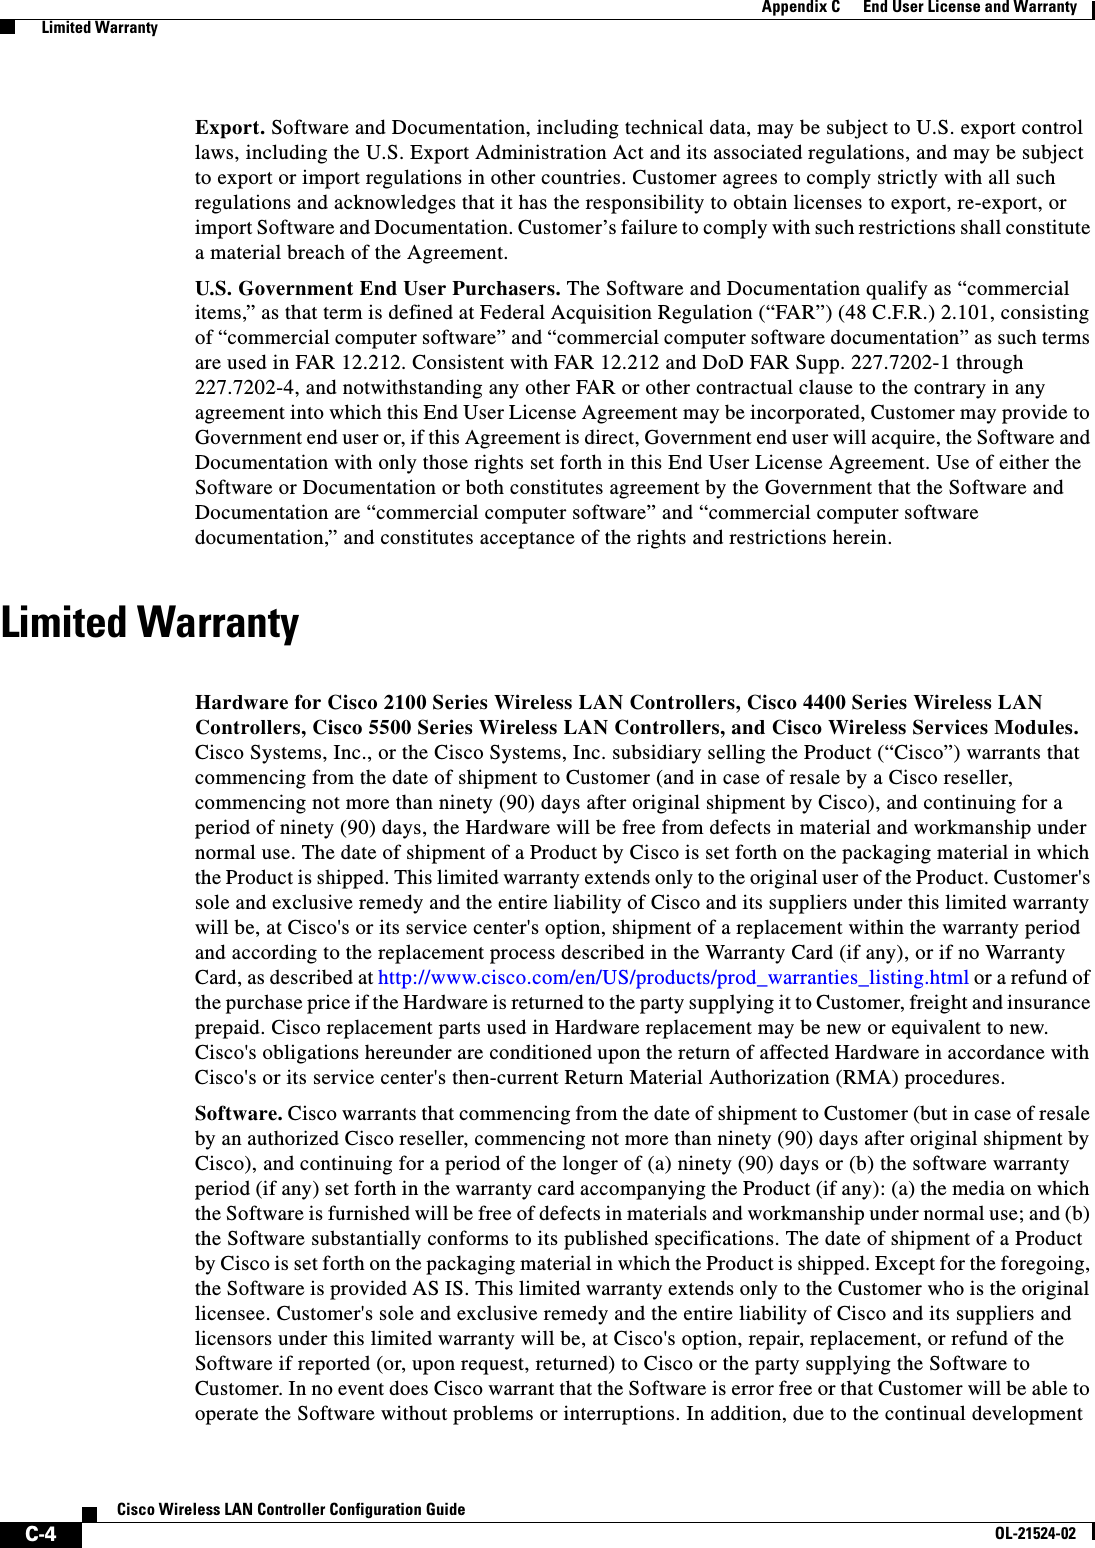  C-4Cisco Wireless LAN Controller Configuration GuideOL-21524-02Appendix C      End User License and Warranty  Limited WarrantyExport. Software and Documentation, including technical data, may be subject to U.S. export control laws, including the U.S. Export Administration Act and its associated regulations, and may be subject to export or import regulations in other countries. Customer agrees to comply strictly with all such regulations and acknowledges that it has the responsibility to obtain licenses to export, re-export, or import Software and Documentation. Customer’s failure to comply with such restrictions shall constitute a material breach of the Agreement.U.S. Government End User Purchasers. The Software and Documentation qualify as “commercial items,” as that term is defined at Federal Acquisition Regulation (“FAR”) (48 C.F.R.) 2.101, consisting of “commercial computer software” and “commercial computer software documentation” as such terms are used in FAR 12.212. Consistent with FAR 12.212 and DoD FAR Supp. 227.7202-1 through 227.7202-4, and notwithstanding any other FAR or other contractual clause to the contrary in any agreement into which this End User License Agreement may be incorporated, Customer may provide to Government end user or, if this Agreement is direct, Government end user will acquire, the Software and Documentation with only those rights set forth in this End User License Agreement. Use of either the Software or Documentation or both constitutes agreement by the Government that the Software and Documentation are “commercial computer software” and “commercial computer software documentation,” and constitutes acceptance of the rights and restrictions herein.Limited WarrantyLimited WarrantyHardware for Cisco 2100 Series Wireless LAN Controllers, Cisco 4400 Series Wireless LAN Controllers, Cisco 5500 Series Wireless LAN Controllers, and Cisco Wireless Services Modules. Cisco Systems, Inc., or the Cisco Systems, Inc. subsidiary selling the Product (“Cisco”) warrants that commencing from the date of shipment to Customer (and in case of resale by a Cisco reseller, commencing not more than ninety (90) days after original shipment by Cisco), and continuing for a period of ninety (90) days, the Hardware will be free from defects in material and workmanship under normal use. The date of shipment of a Product by Cisco is set forth on the packaging material in which the Product is shipped. This limited warranty extends only to the original user of the Product. Customer&apos;s sole and exclusive remedy and the entire liability of Cisco and its suppliers under this limited warranty will be, at Cisco&apos;s or its service center&apos;s option, shipment of a replacement within the warranty period and according to the replacement process described in the Warranty Card (if any), or if no Warranty Card, as described at http://www.cisco.com/en/US/products/prod_warranties_listing.html or a refund of the purchase price if the Hardware is returned to the party supplying it to Customer, freight and insurance prepaid. Cisco replacement parts used in Hardware replacement may be new or equivalent to new. Cisco&apos;s obligations hereunder are conditioned upon the return of affected Hardware in accordance with Cisco&apos;s or its service center&apos;s then-current Return Material Authorization (RMA) procedures. Software. Cisco warrants that commencing from the date of shipment to Customer (but in case of resale by an authorized Cisco reseller, commencing not more than ninety (90) days after original shipment by Cisco), and continuing for a period of the longer of (a) ninety (90) days or (b) the software warranty period (if any) set forth in the warranty card accompanying the Product (if any): (a) the media on which the Software is furnished will be free of defects in materials and workmanship under normal use; and (b) the Software substantially conforms to its published specifications. The date of shipment of a Product by Cisco is set forth on the packaging material in which the Product is shipped. Except for the foregoing, the Software is provided AS IS. This limited warranty extends only to the Customer who is the original licensee. Customer&apos;s sole and exclusive remedy and the entire liability of Cisco and its suppliers and licensors under this limited warranty will be, at Cisco&apos;s option, repair, replacement, or refund of the Software if reported (or, upon request, returned) to Cisco or the party supplying the Software to Customer. In no event does Cisco warrant that the Software is error free or that Customer will be able to operate the Software without problems or interruptions. In addition, due to the continual development 